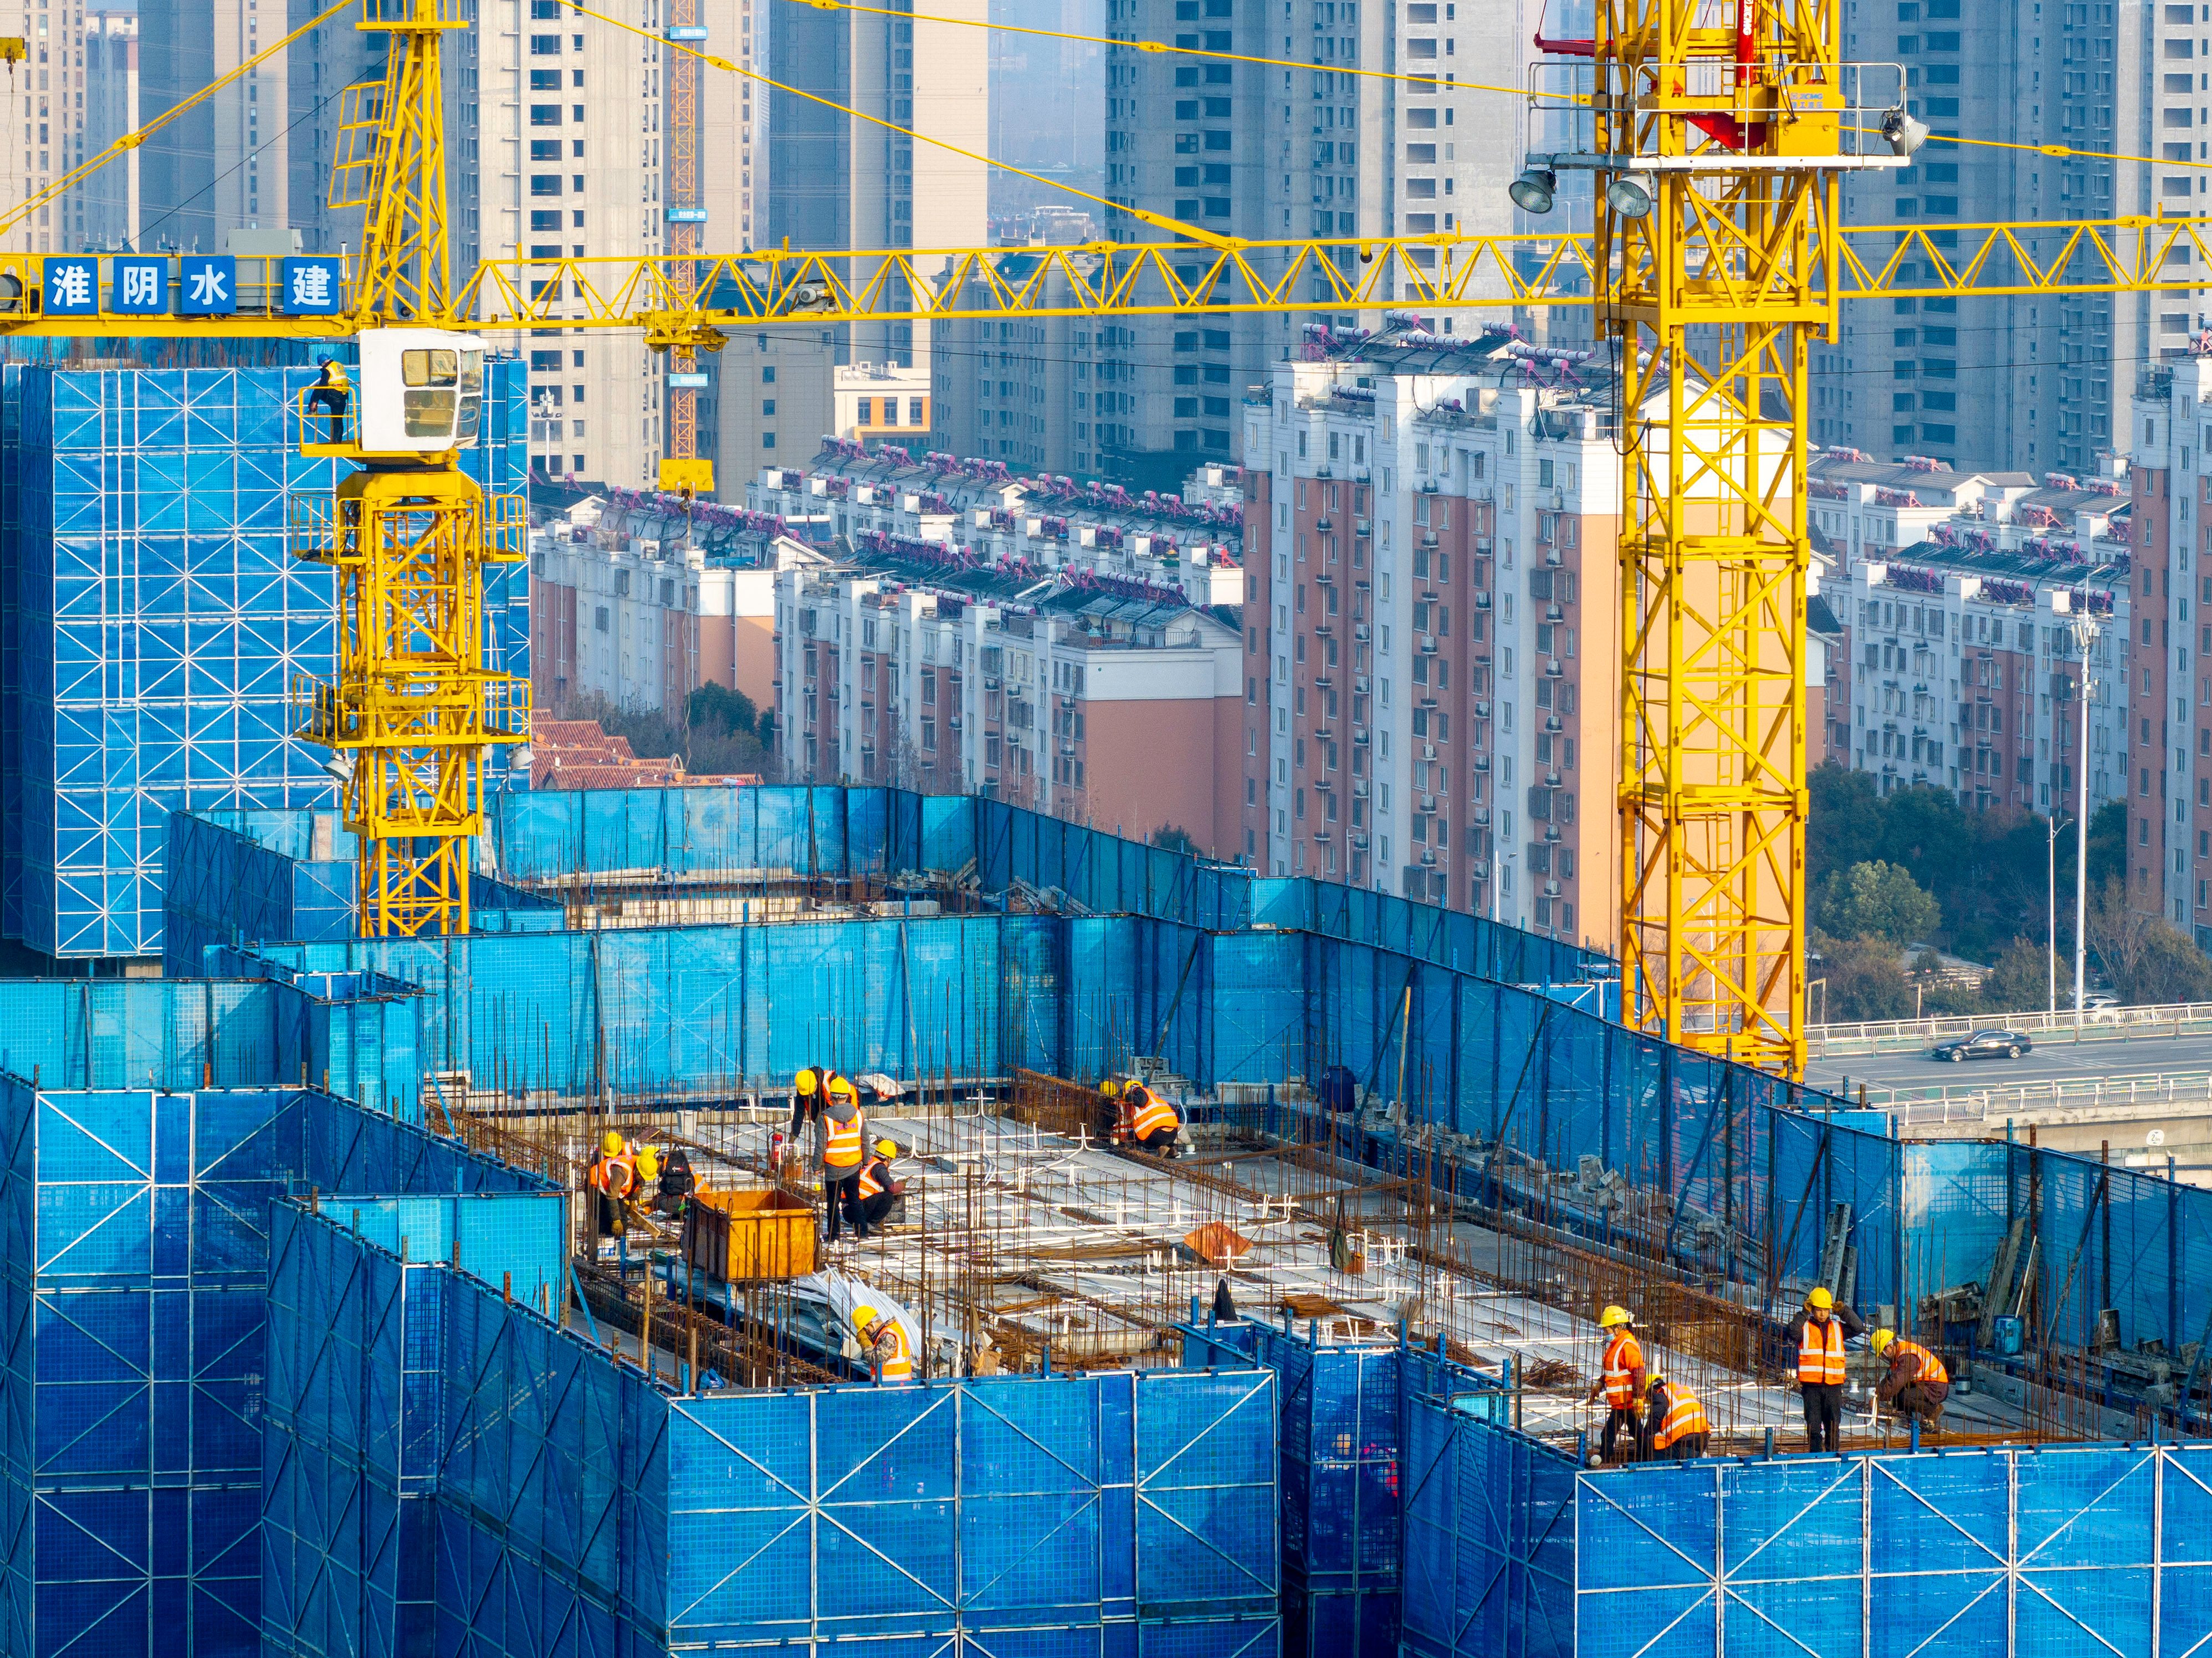 Property investment in China slumped by 9 per cent year on year in combined figures for January and February. Photo: Getty Images